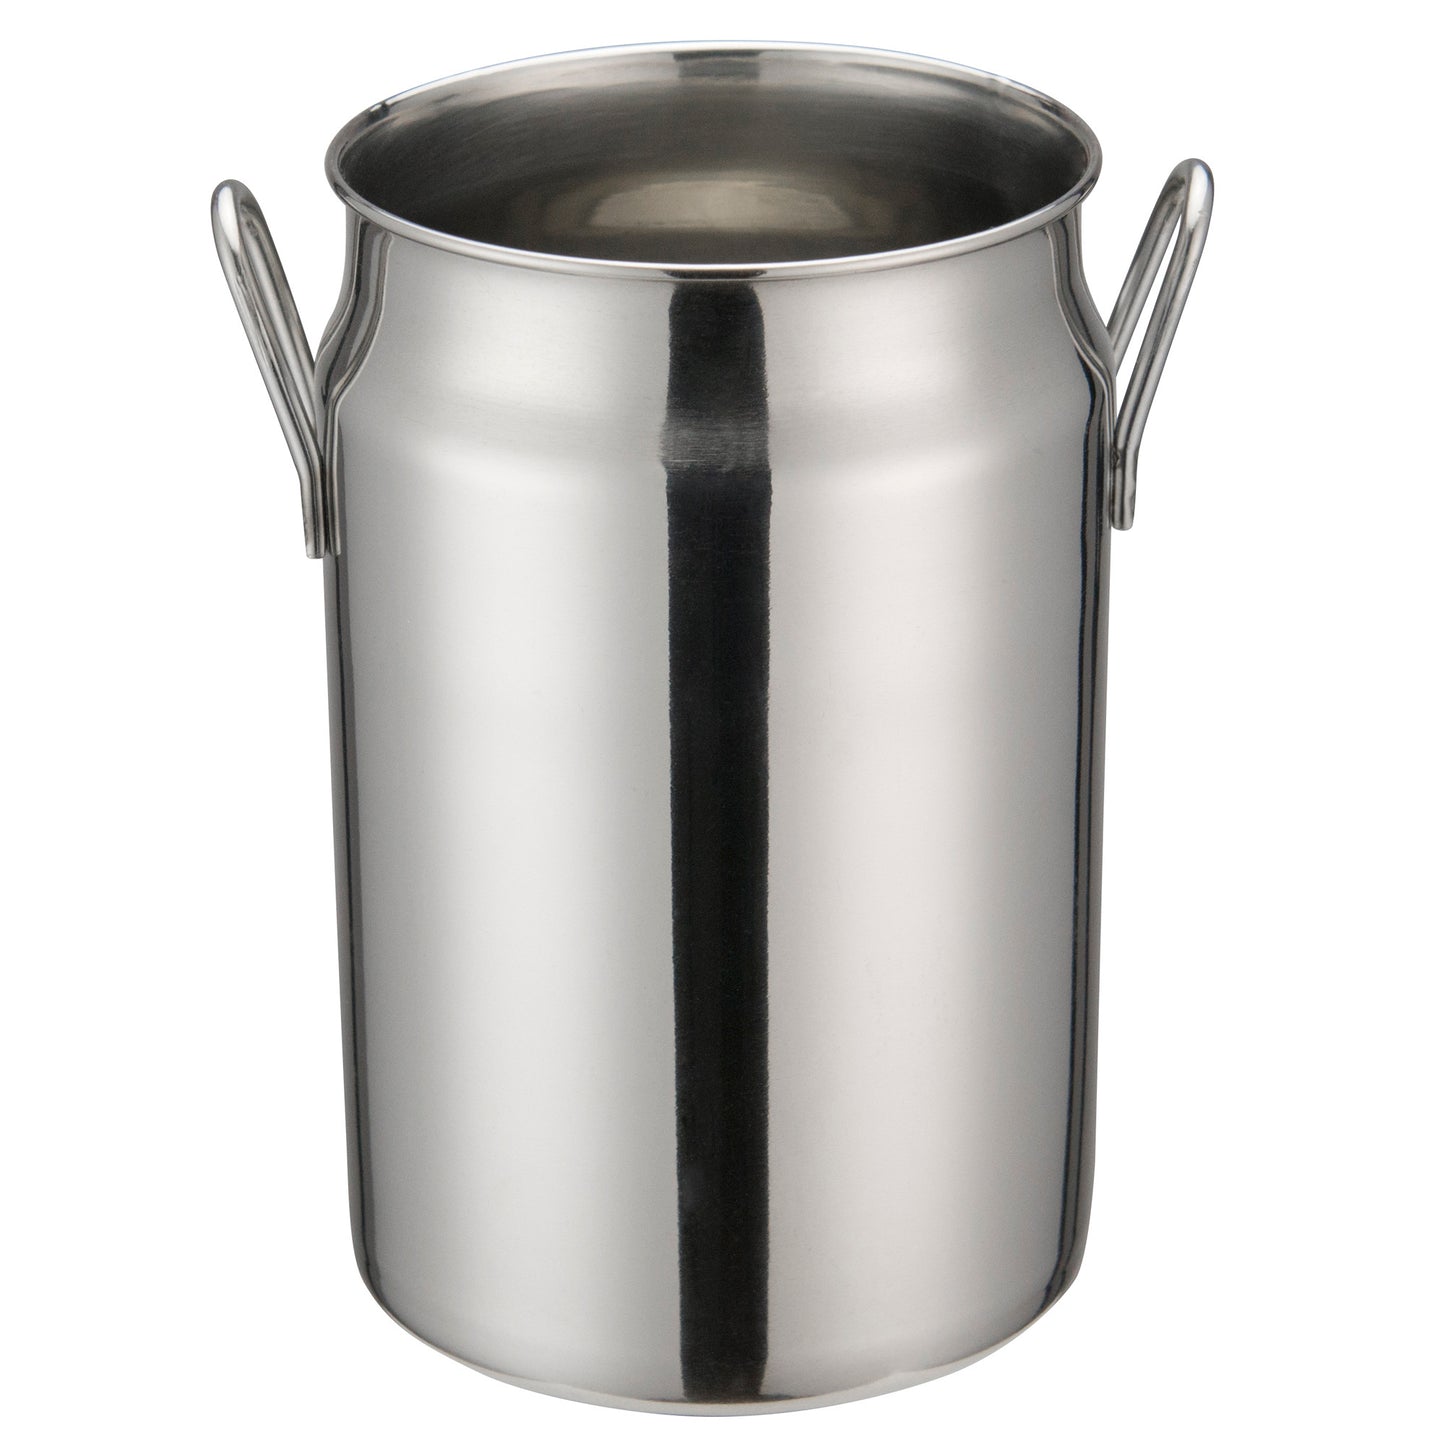 DDSD-104S - Mini Milk Can, Stainless Steel - 3-1/8" x 5"